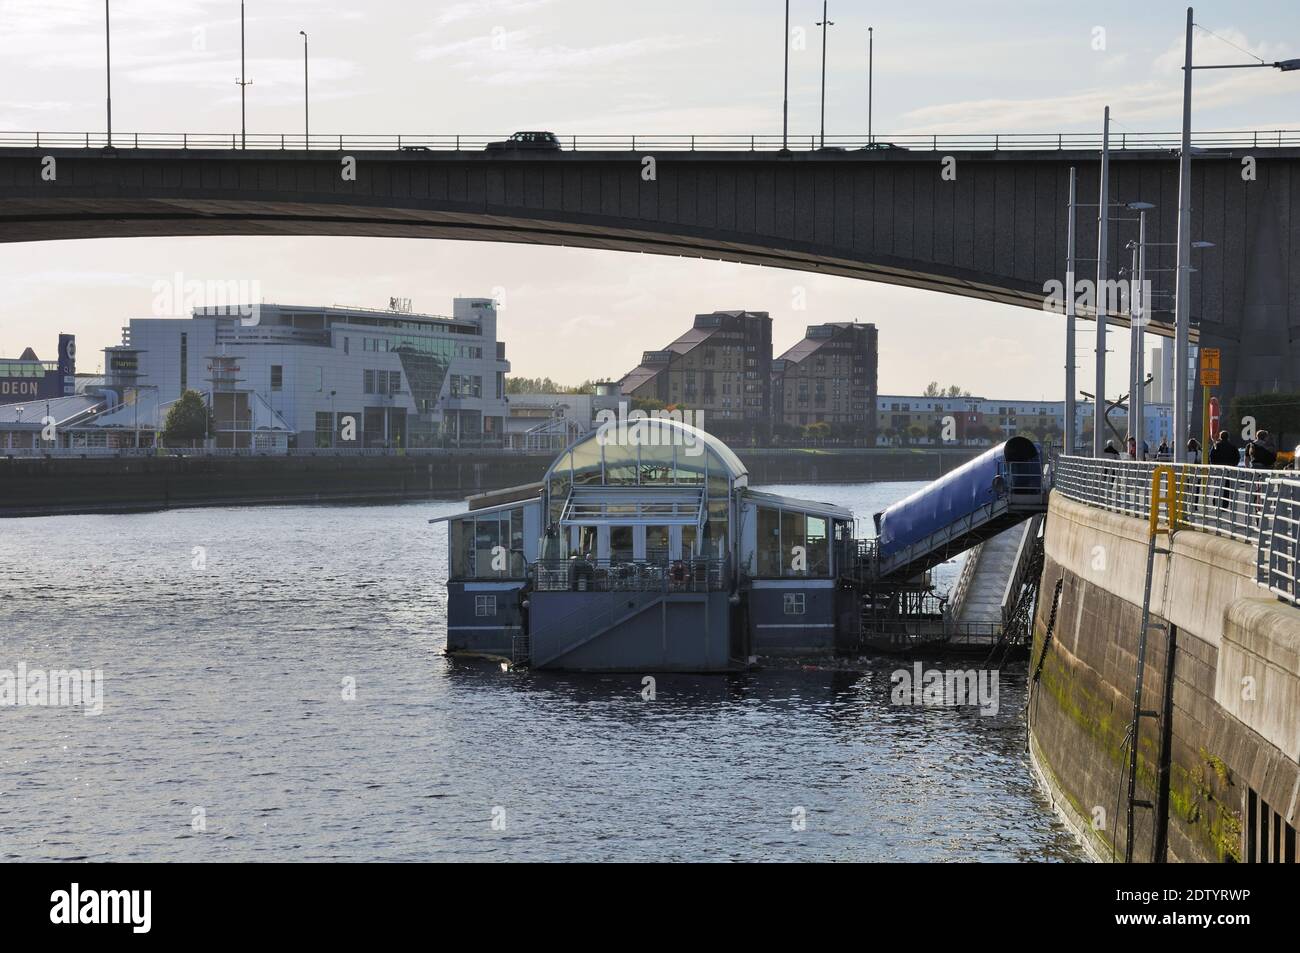 The old Renfrew ferry at Anderston Quay, Glasgow, Scotland is now a food and entertainment venue on the river Clyde below the Kingston bridge. Stock Photo